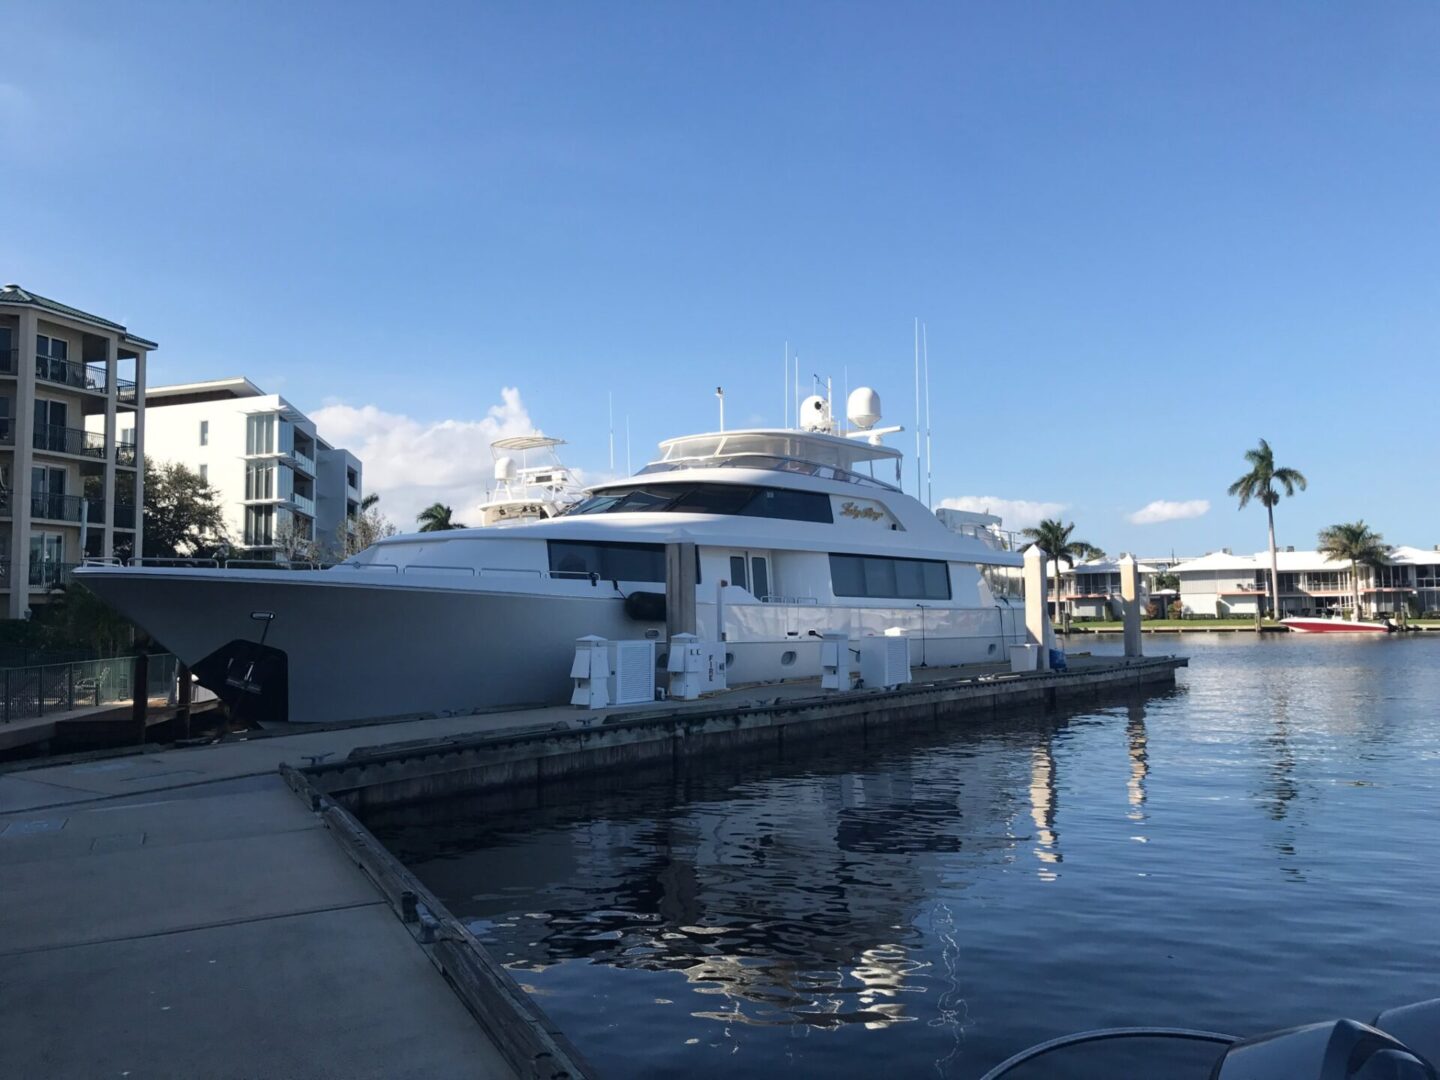 A Lady Raye docked at the pier